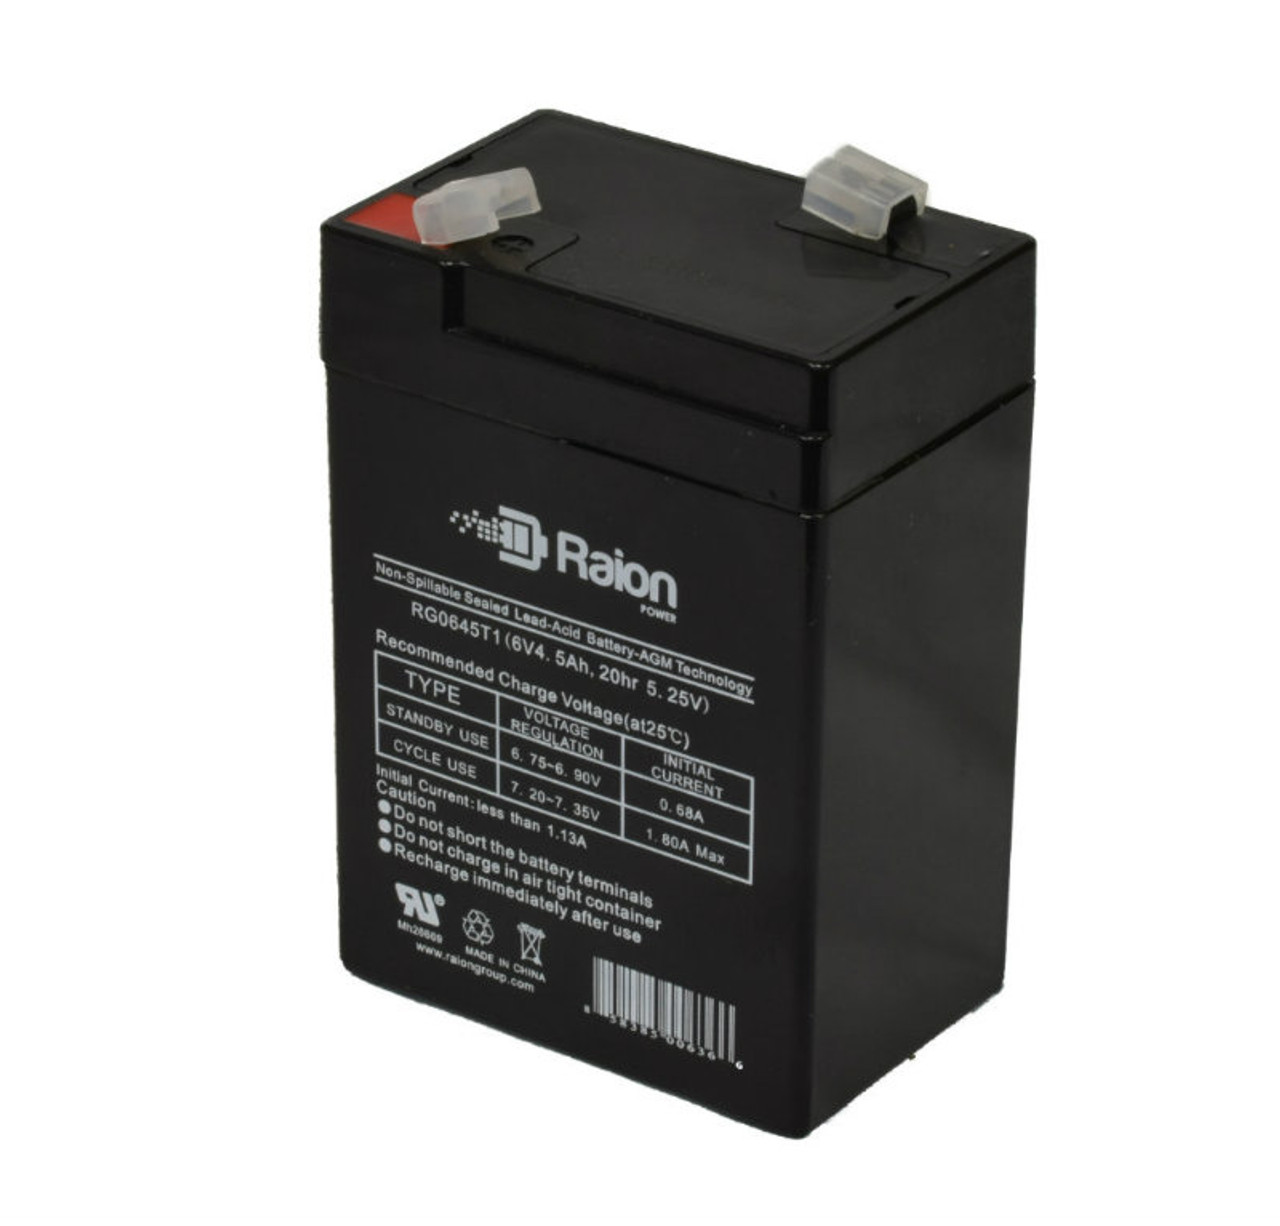 Raion Power RG0645T1 6V 4.5Ah Replacement Battery Cartridge for Flying Power NS6-4.5